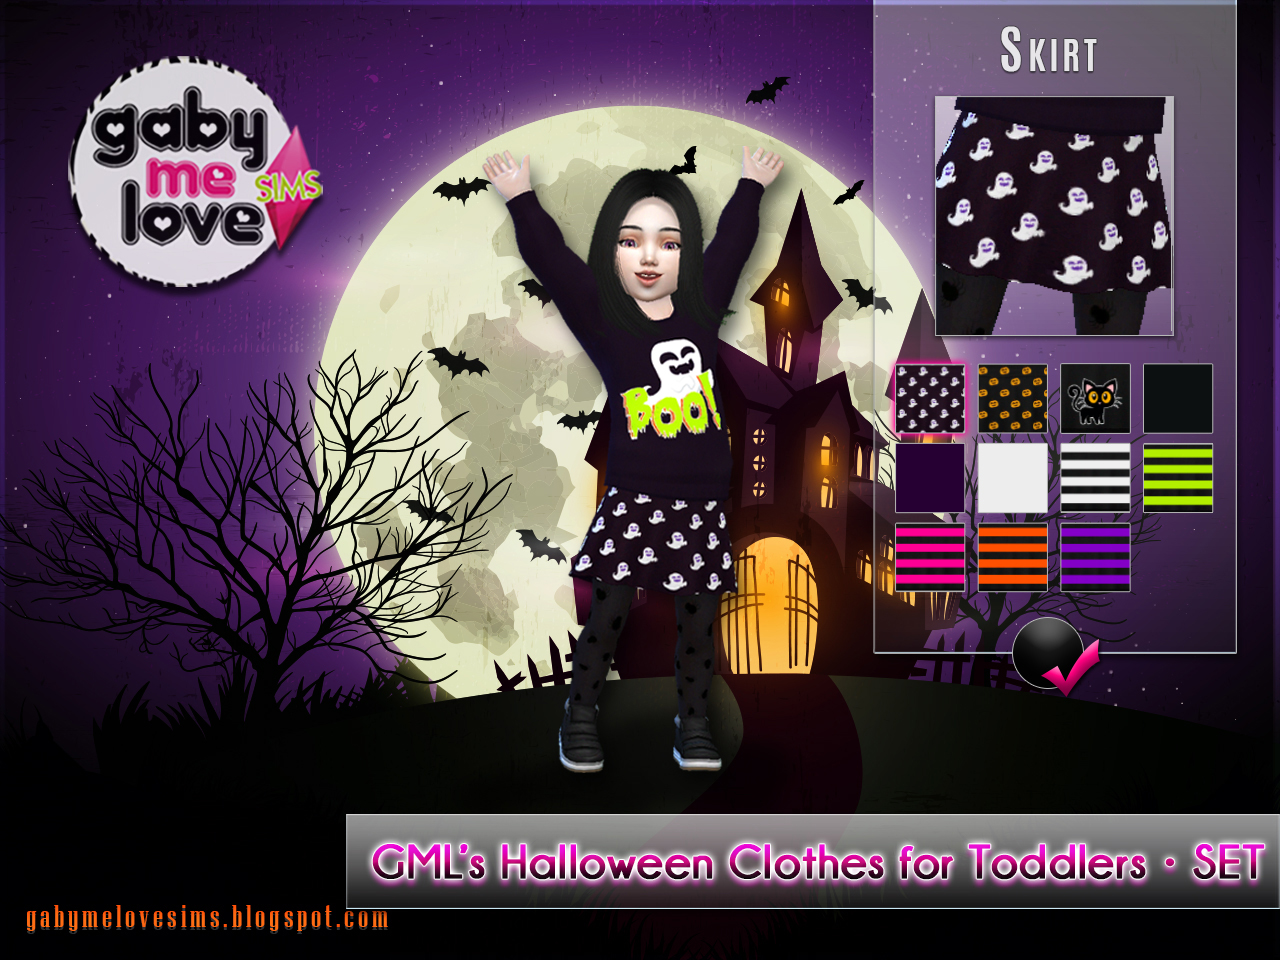 [Gabymelove Sims] GML’s Halloween Clothes for Toddlers • SET (4)